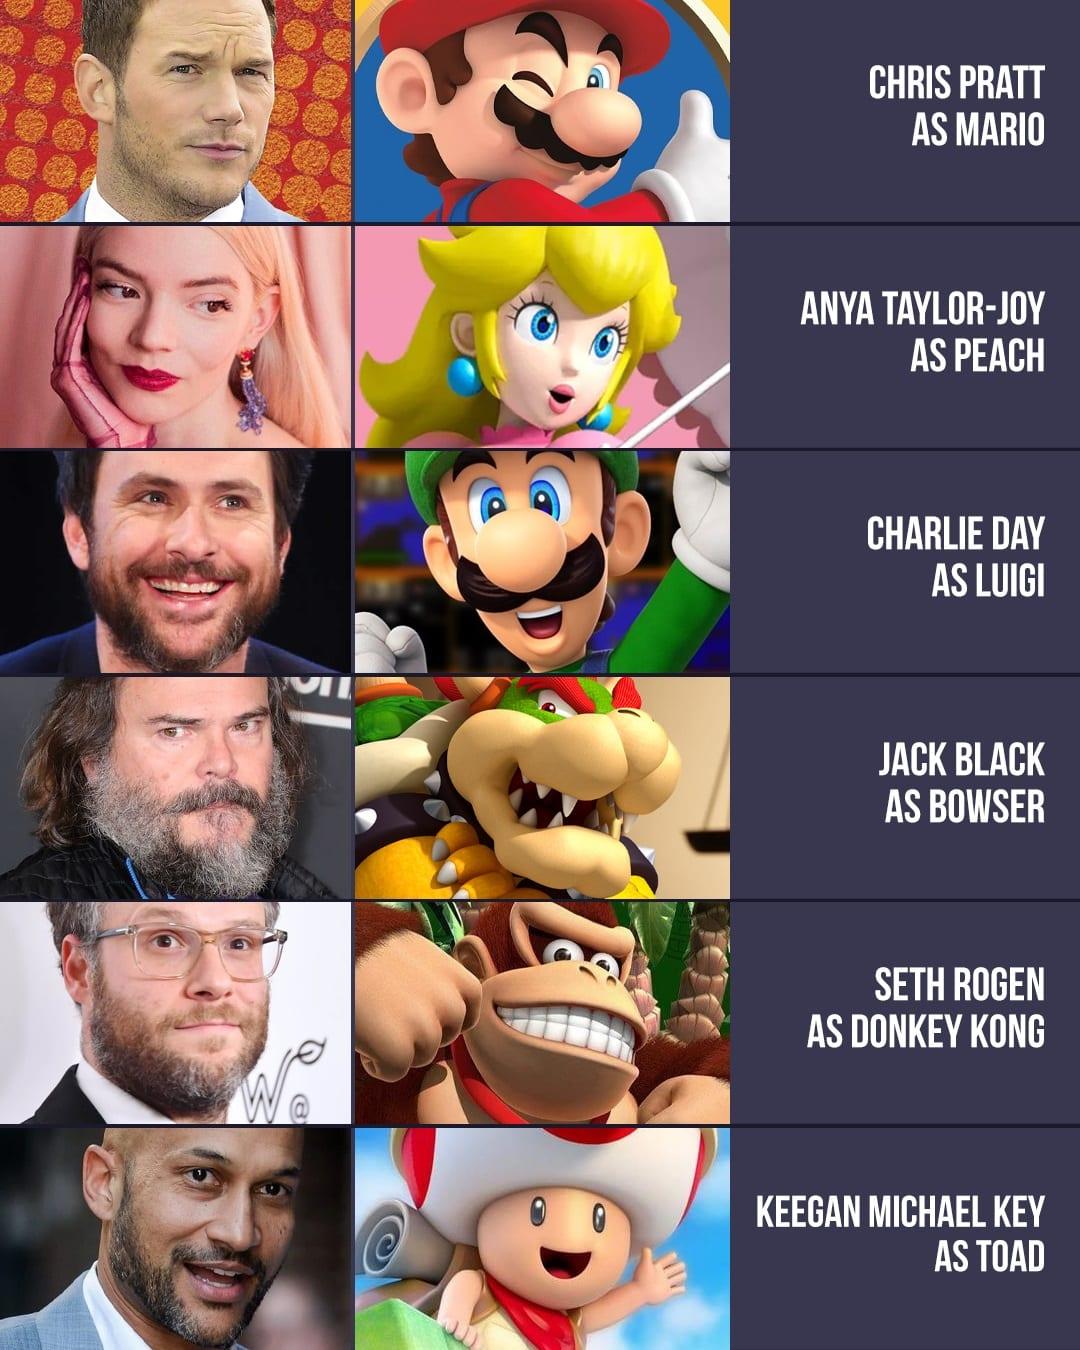 The newly announced Mario movie has an absolutely stellar cast.